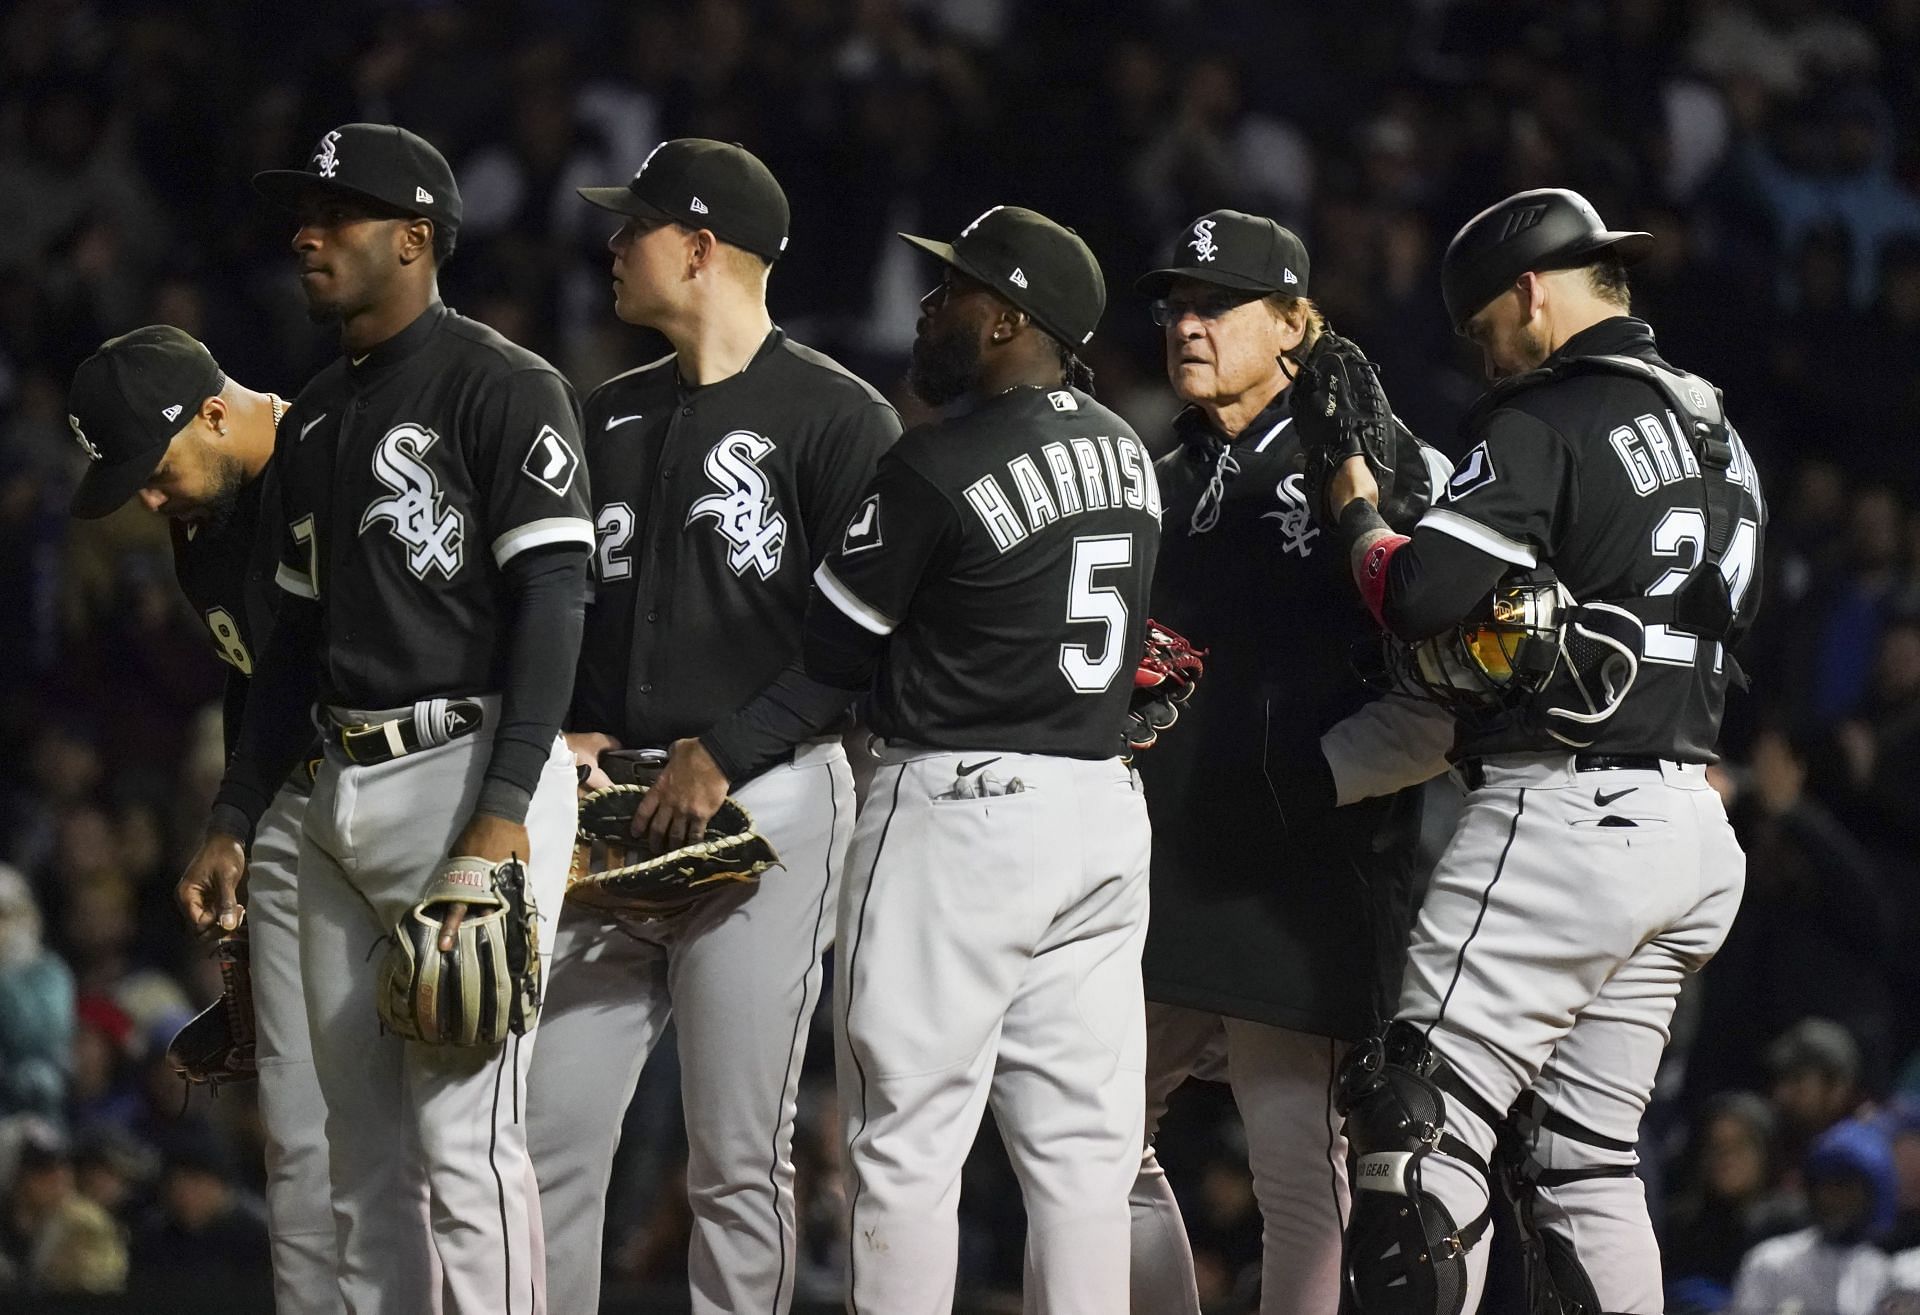 Manager Tony La Russa of the Chicago White Sox visits the mound for a pitching change.